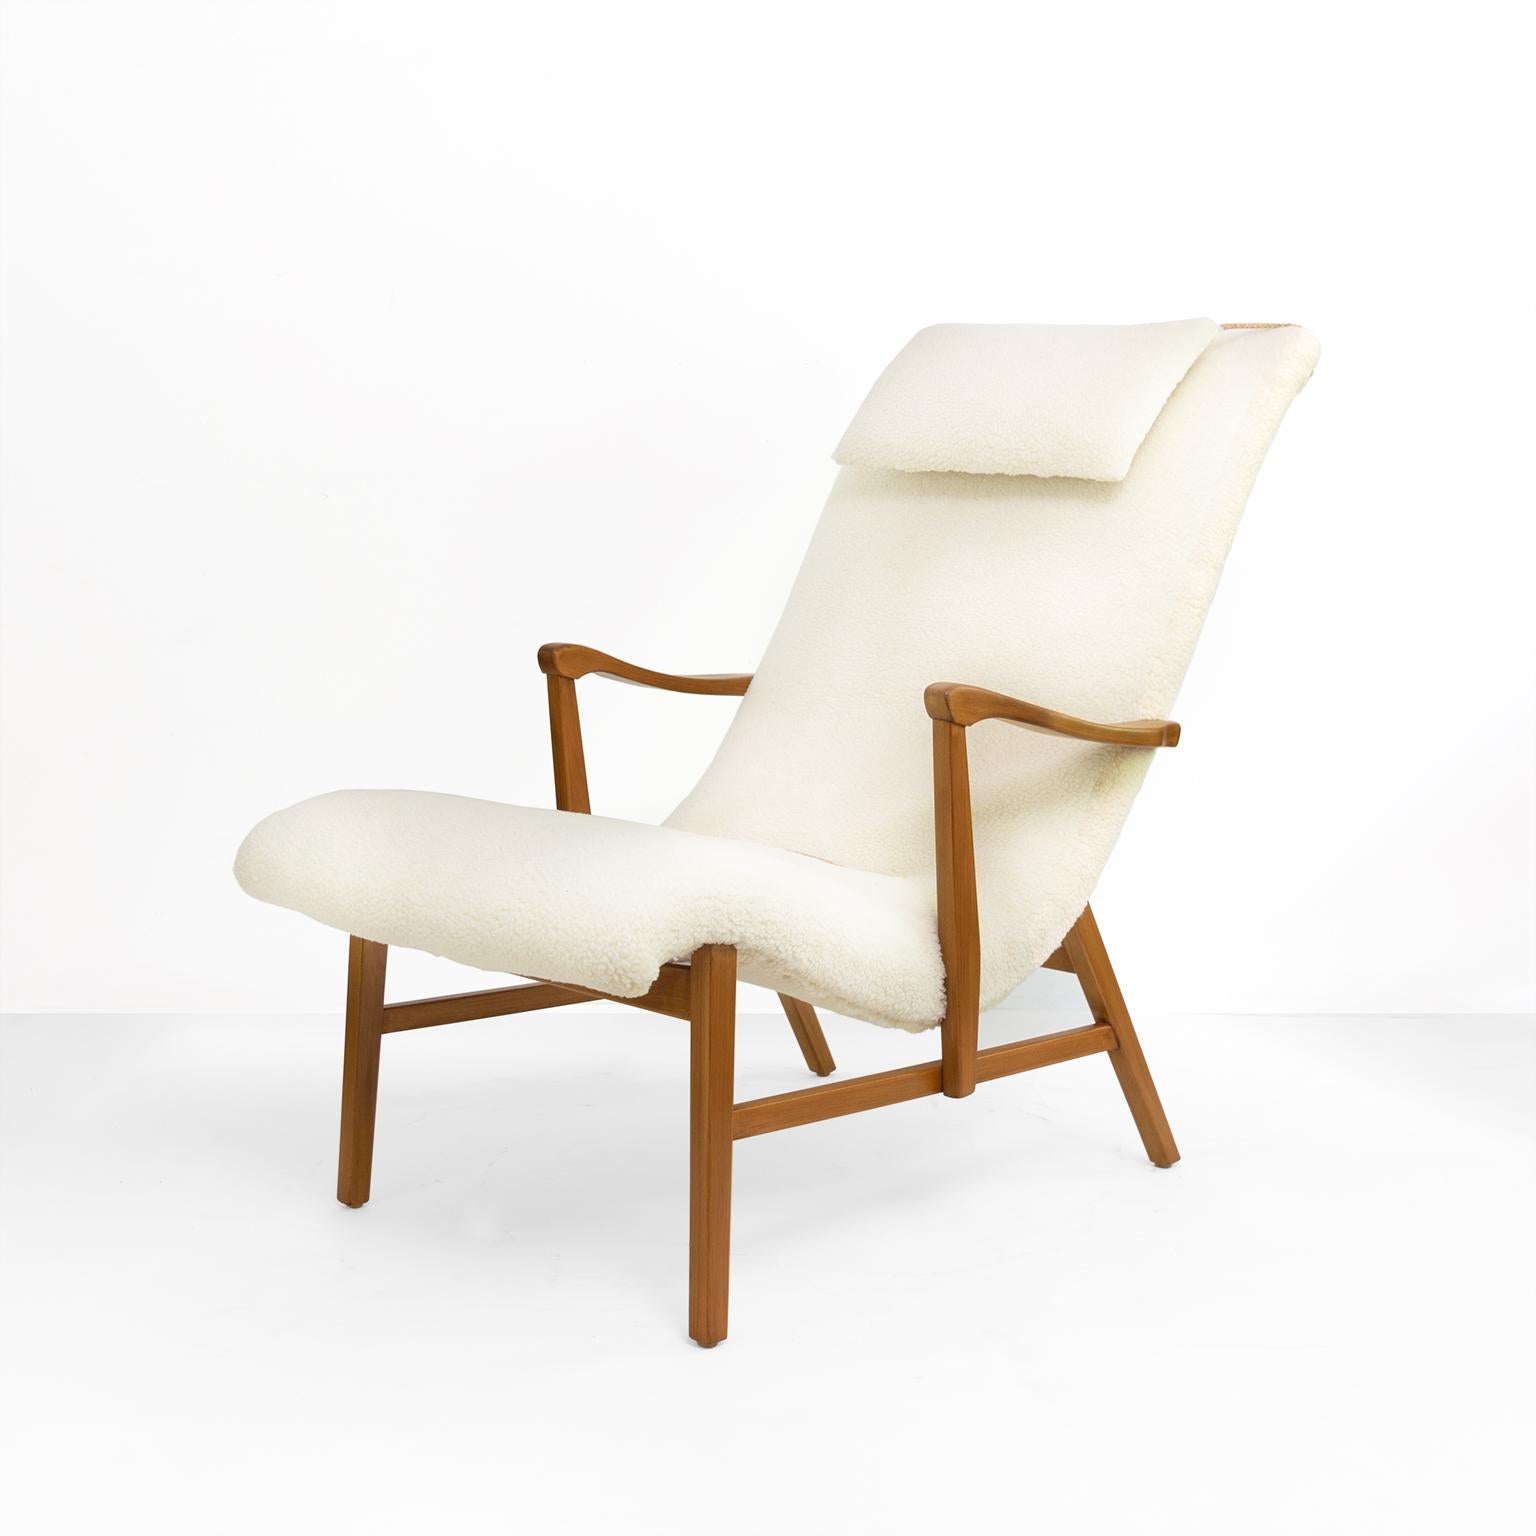 A Scandinavian Modern lounge chair with newly restored stained beech wood frame. The chair has been newly upholstered in faux sheepskin upholstery fabric. Detailed with leather cords and button, a head pillow adds extra comfort. 

Total height: 37”,